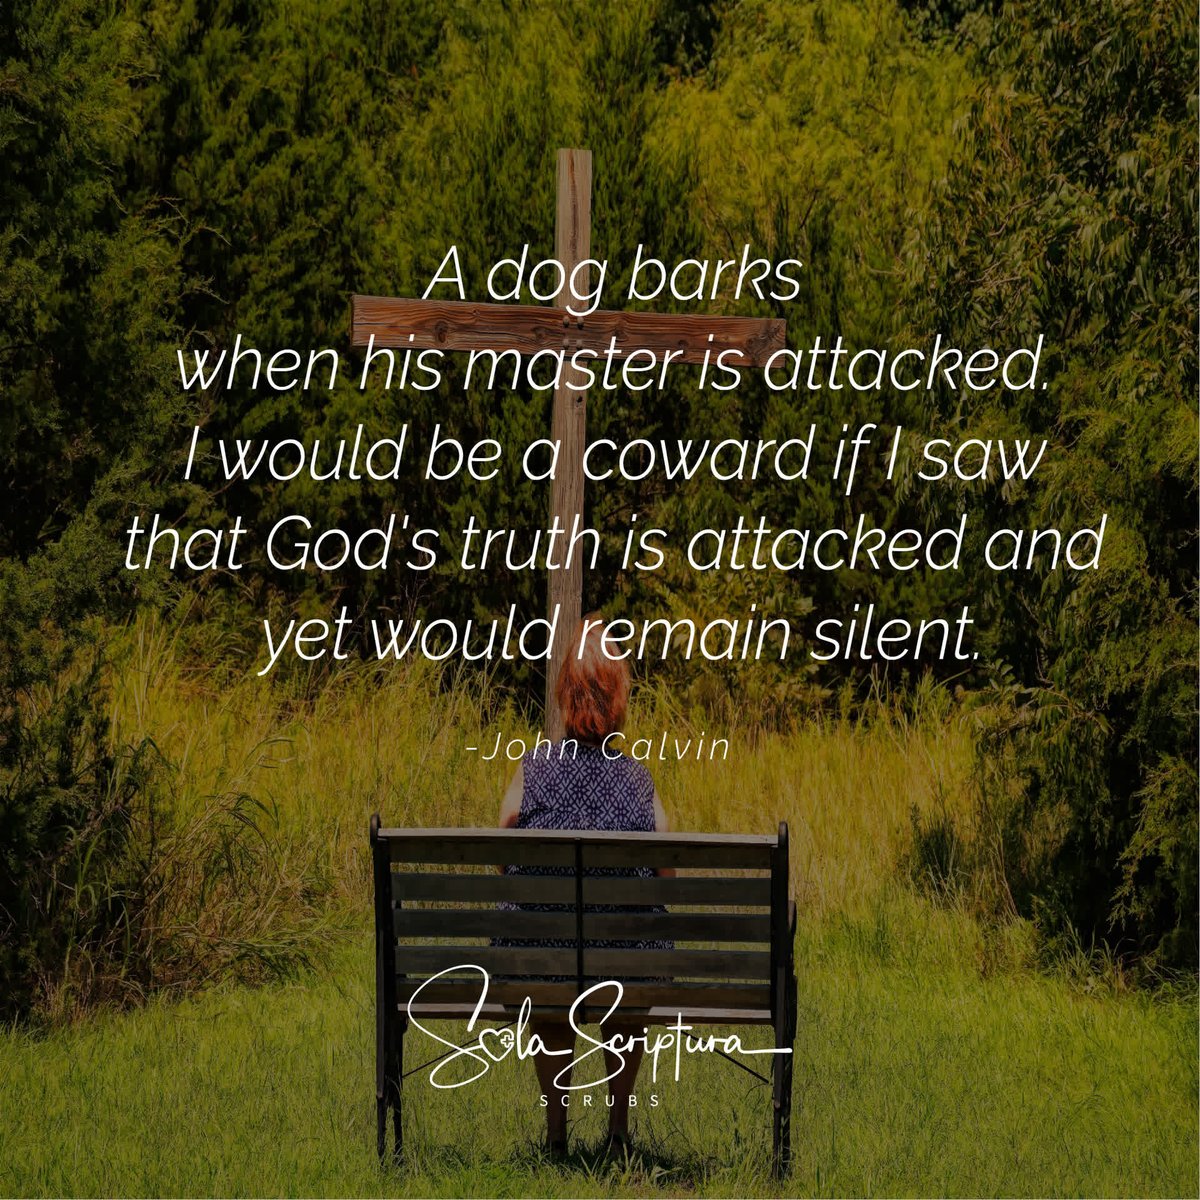 Just as a loyal dog defends its master, let us boldly defend God's truth when it is under attack. May we never shy away from standing up for what is right and proclaiming the Gospel with courage. No more backseat Christianity! #DefendTruth #BoldWitness #SolaScripturaScrubs